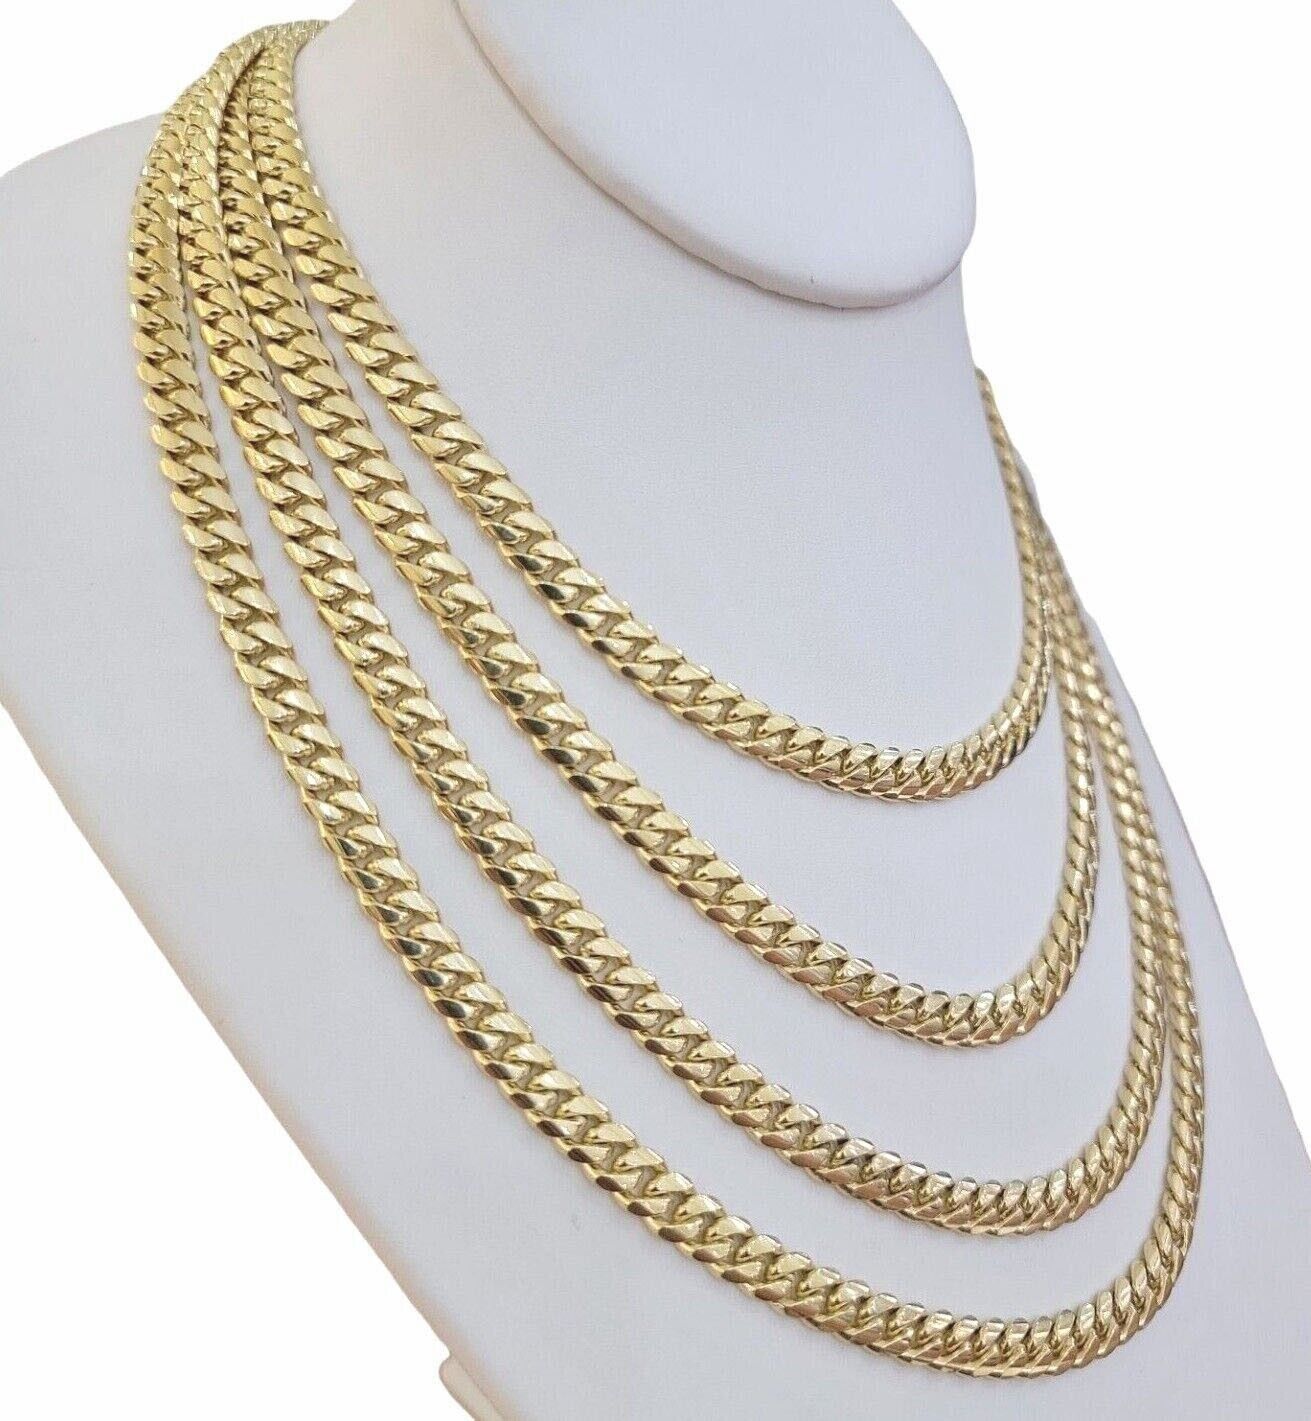 Real 14k Yellow Gold Miami Cuban Link Chain 7mm 22" Necklace Box Lock